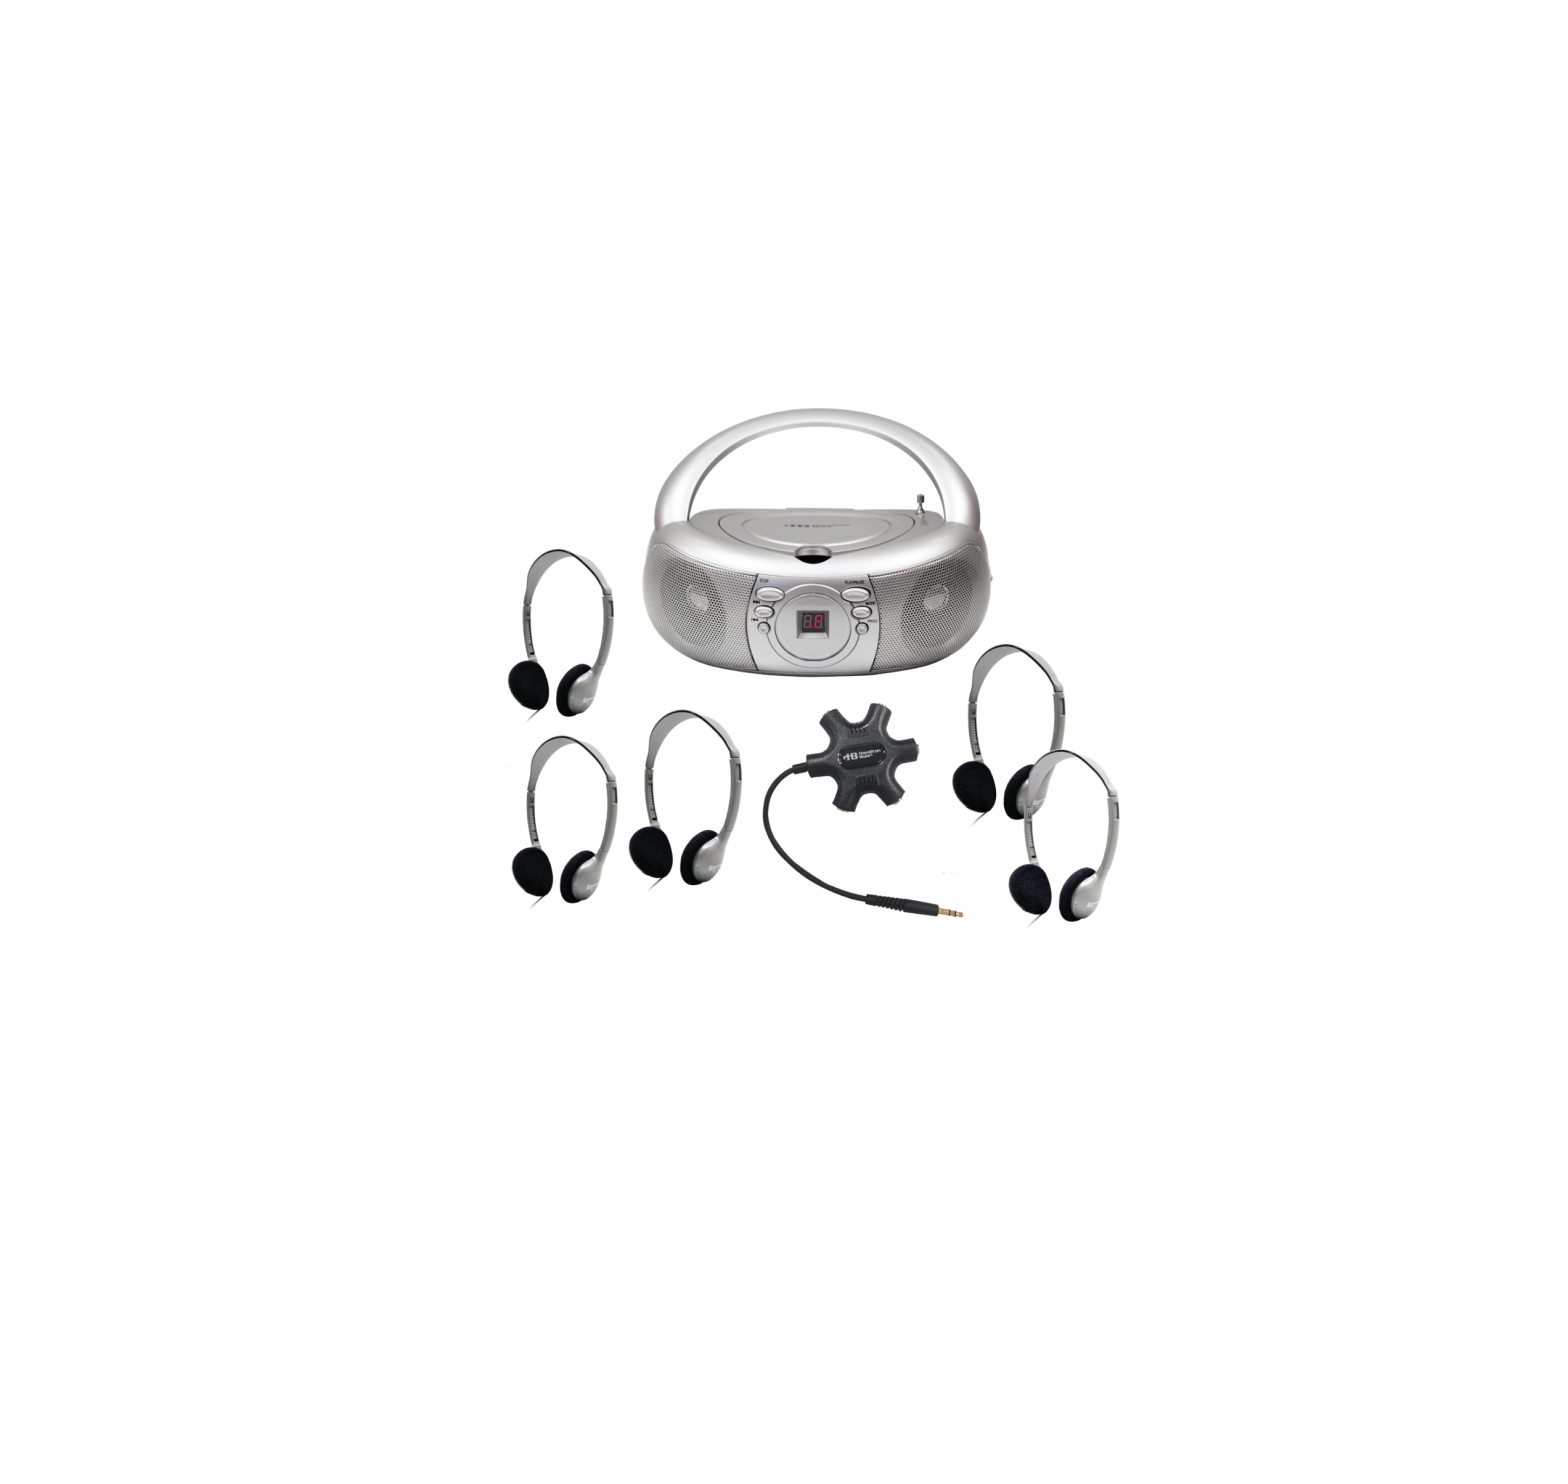 HamiltonBuhl Listening Center with 5 Personal-Sized HA2 Headphones User Guide